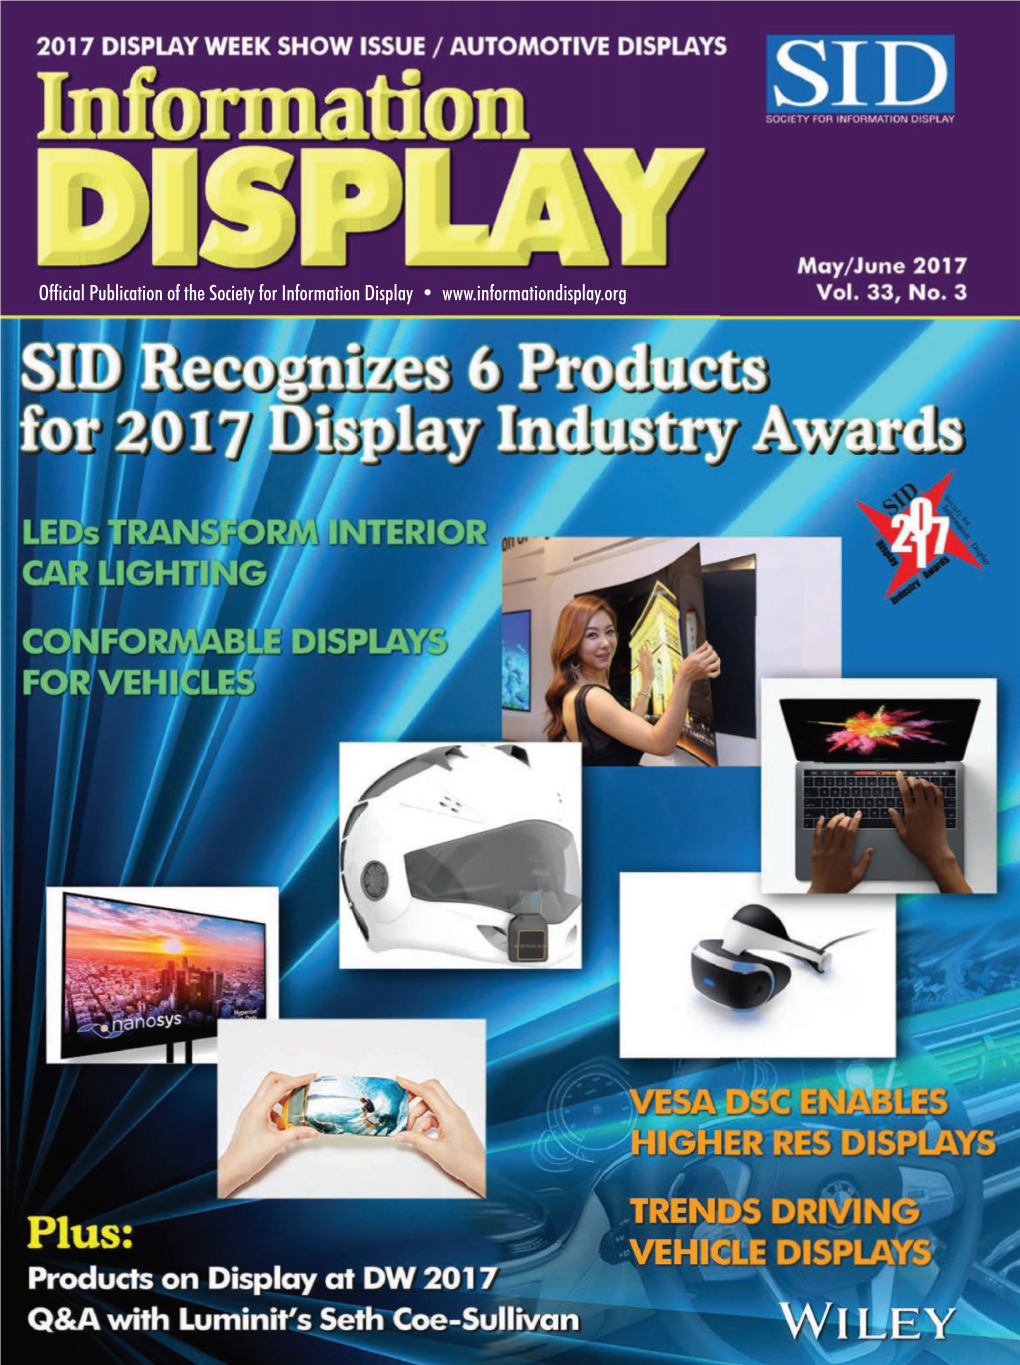 Information Display Magazine May/June 2017 Issue 3